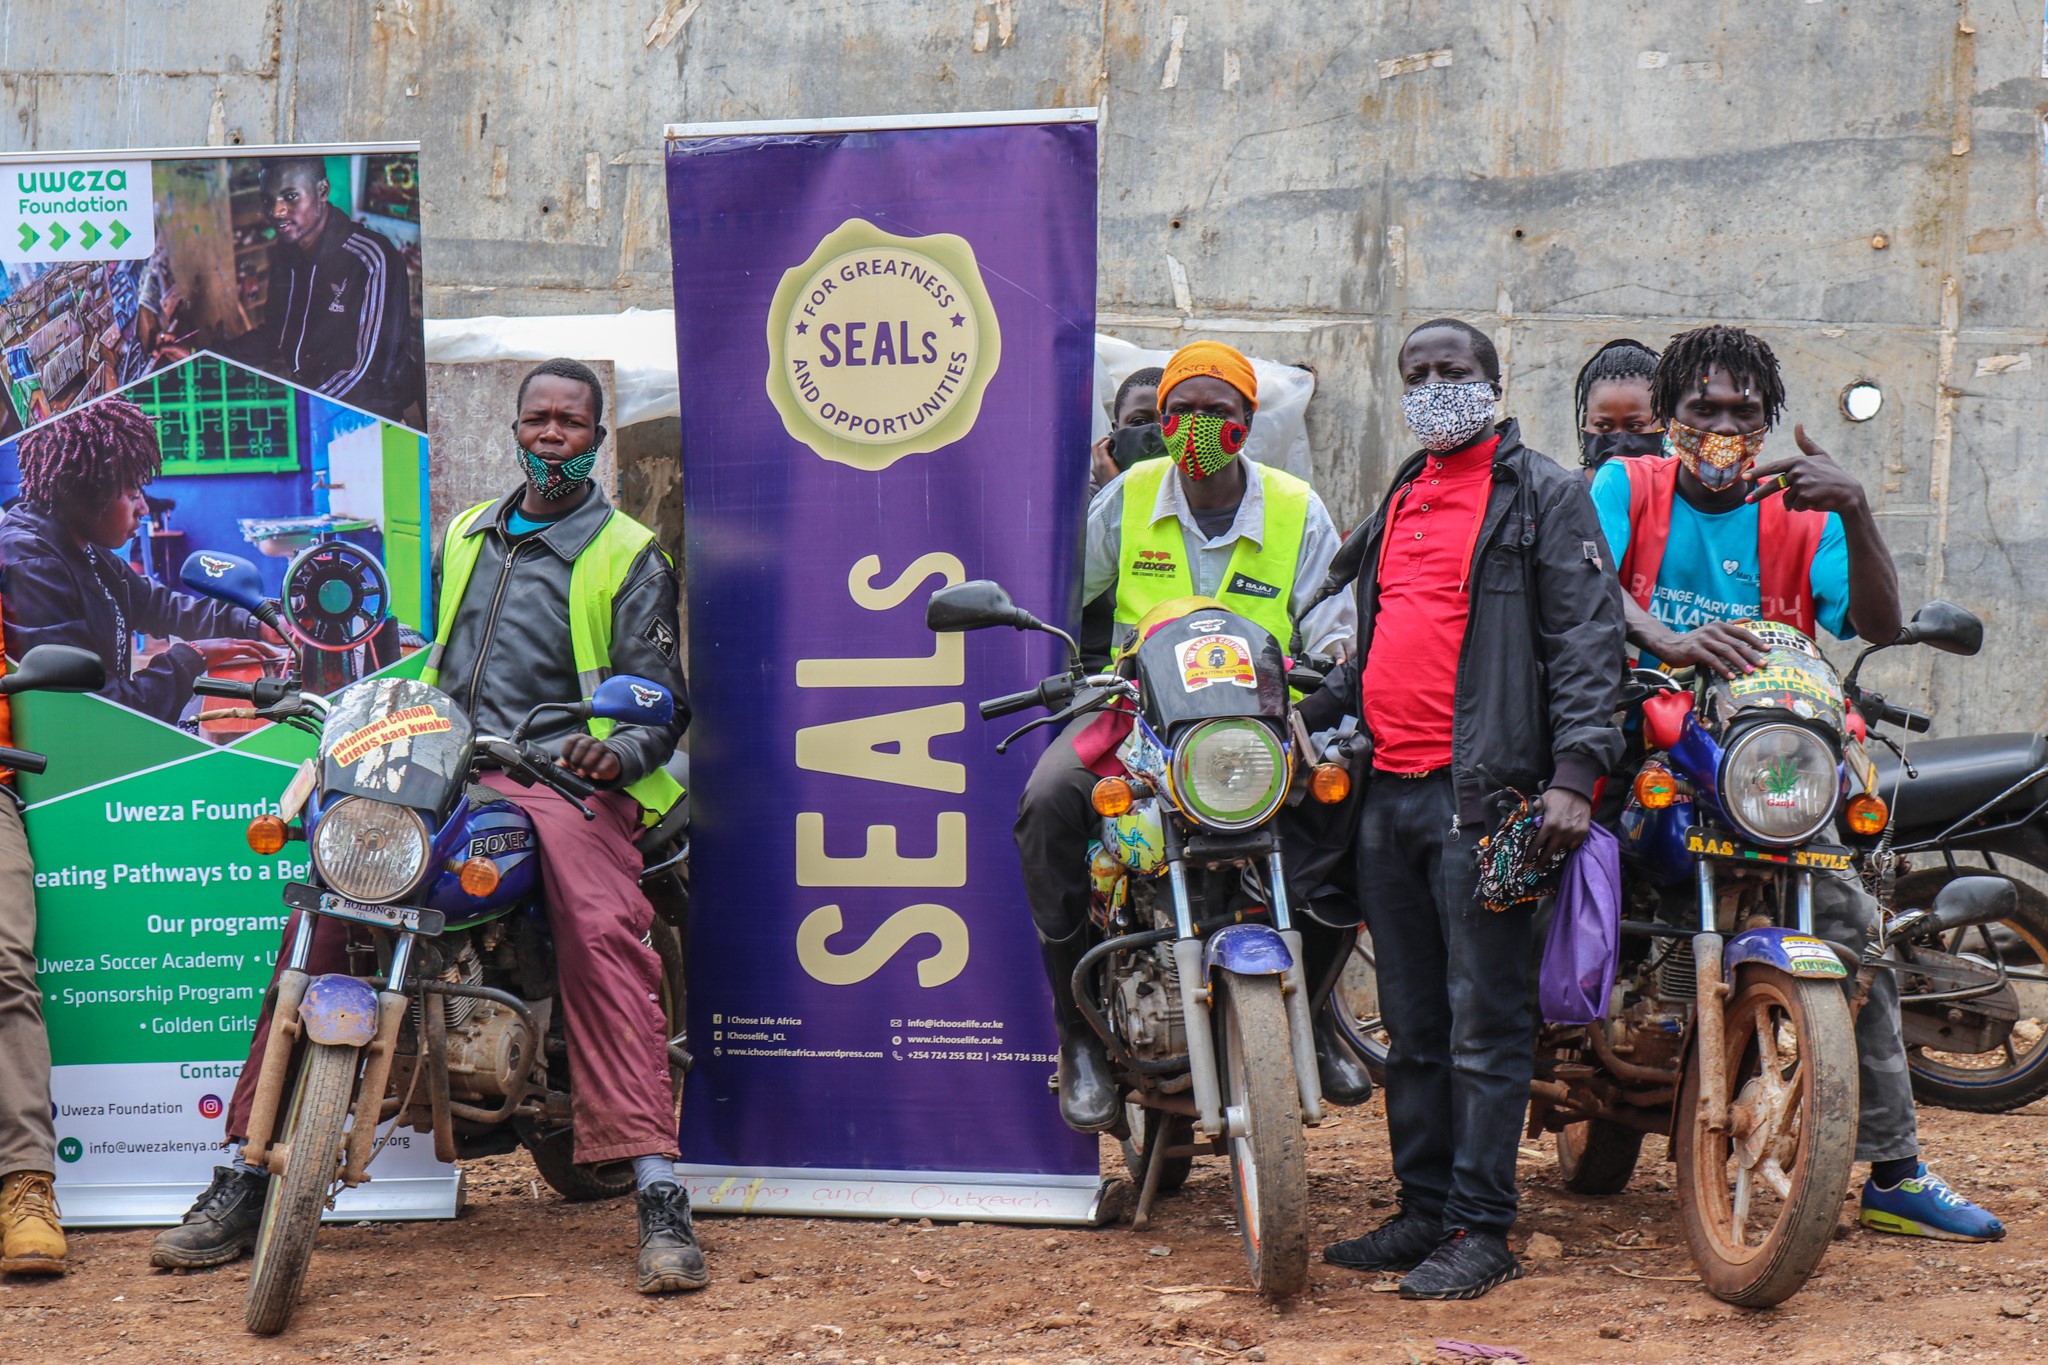 Distribution of Free Face Masks to Boda Boda (Motorcycle) Riders